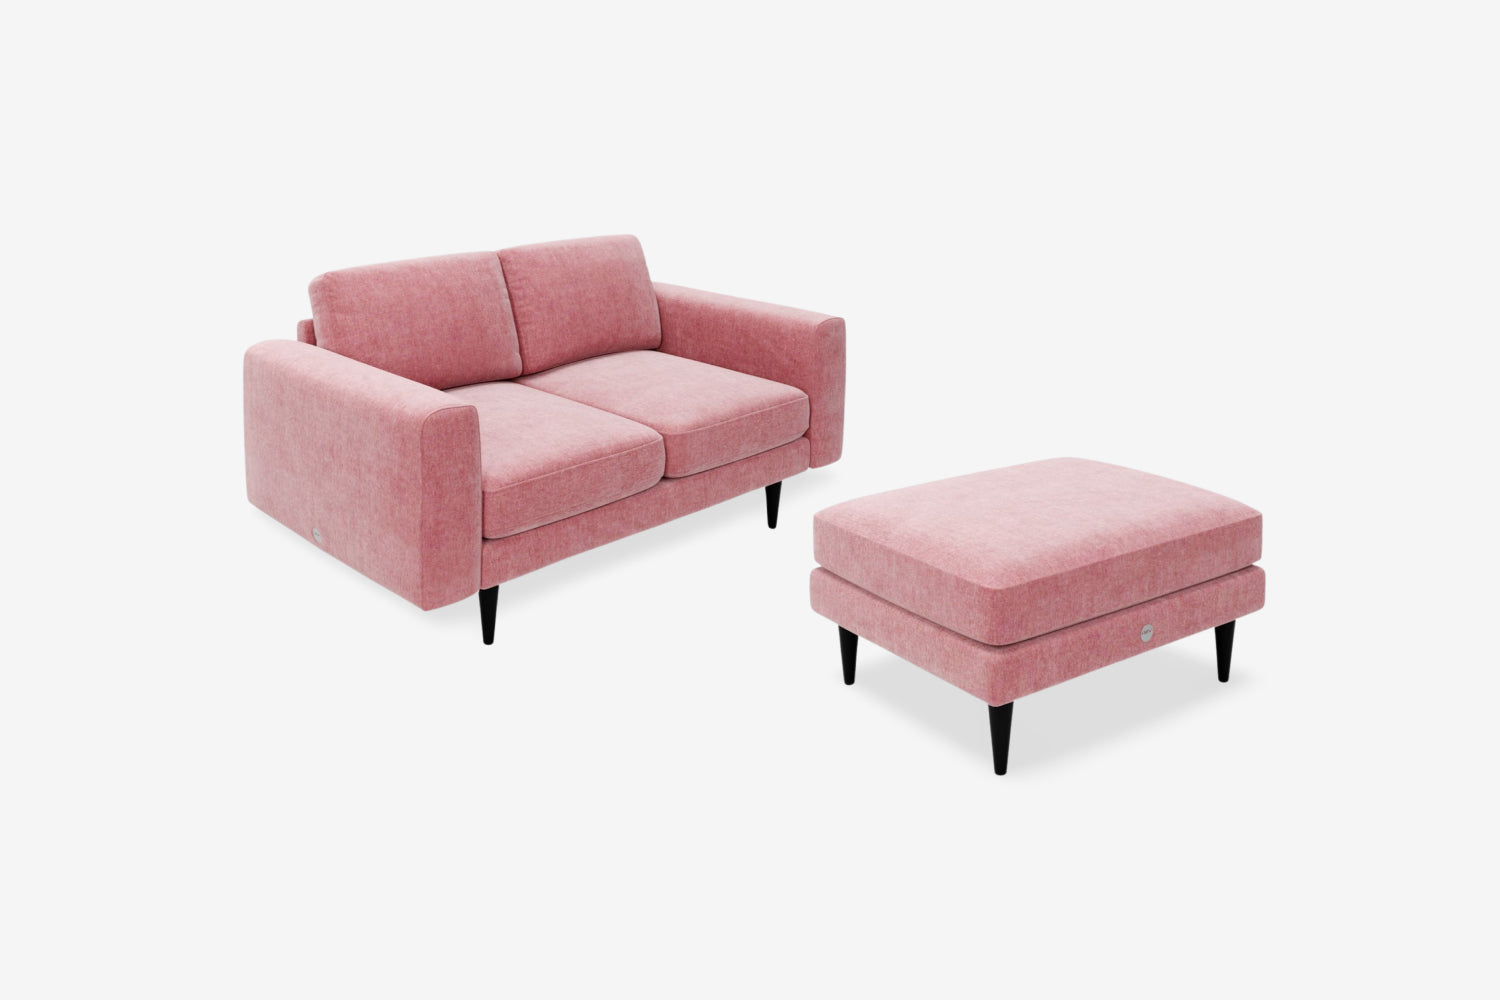 The Big Chill - 2 Seater Sofa and Footstool Set - Blush Coral